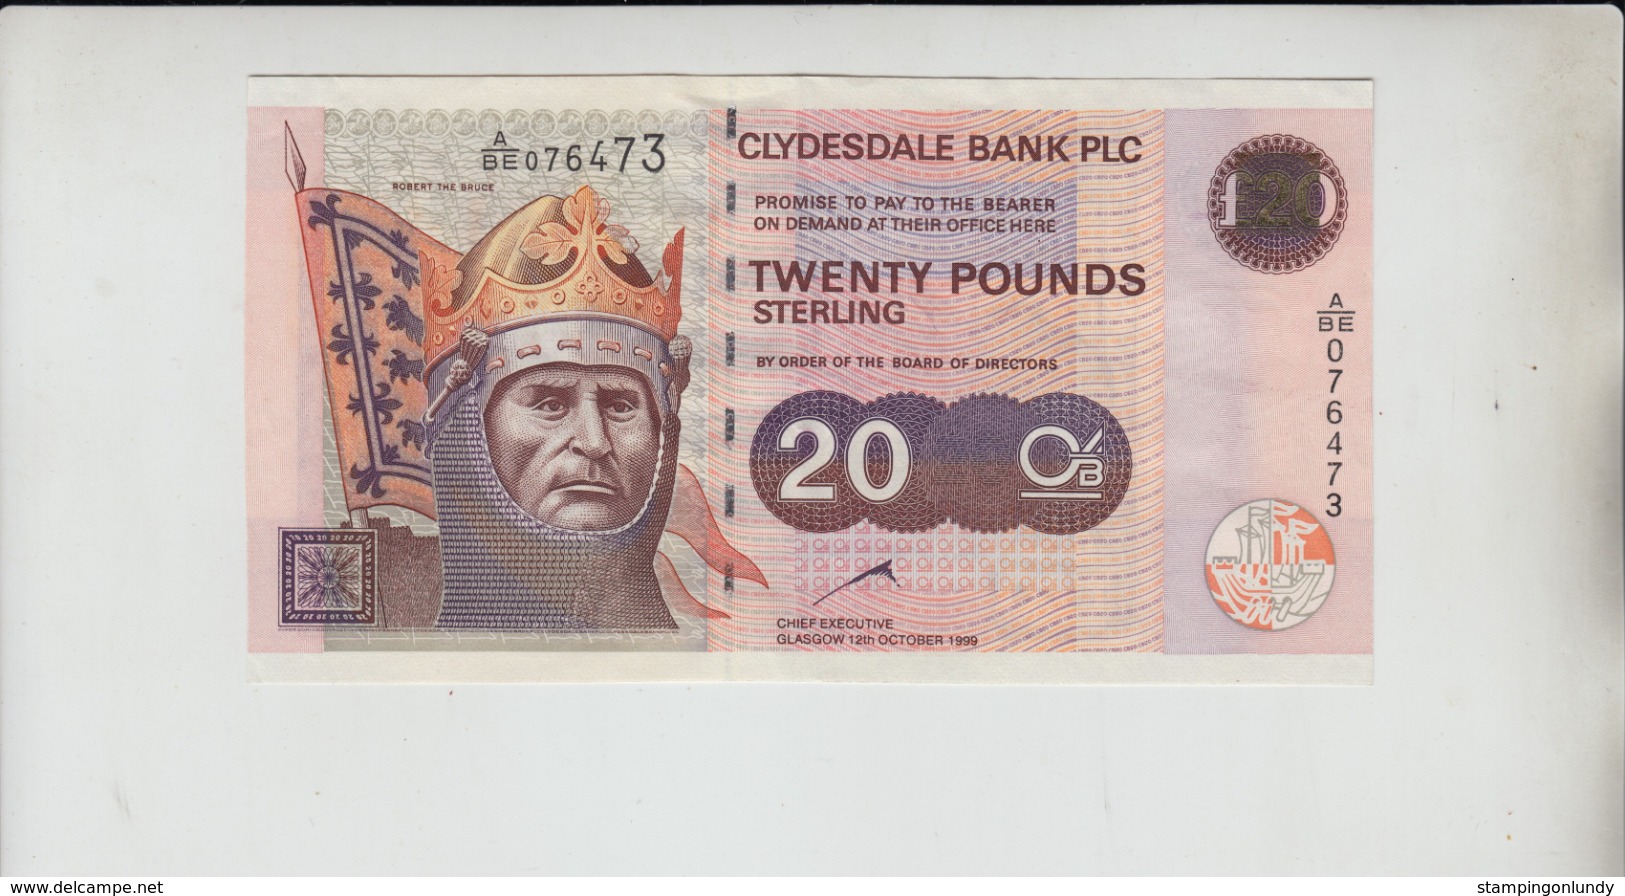 AB643 Clydesdale Bank PLC £20 Note 12th Oct 1999 #A/BE 076473 FREE UK P+P BUY 1 GET 1 (CHEAPEST) 1/2 PRICE BANKNOTES - 20 Pounds